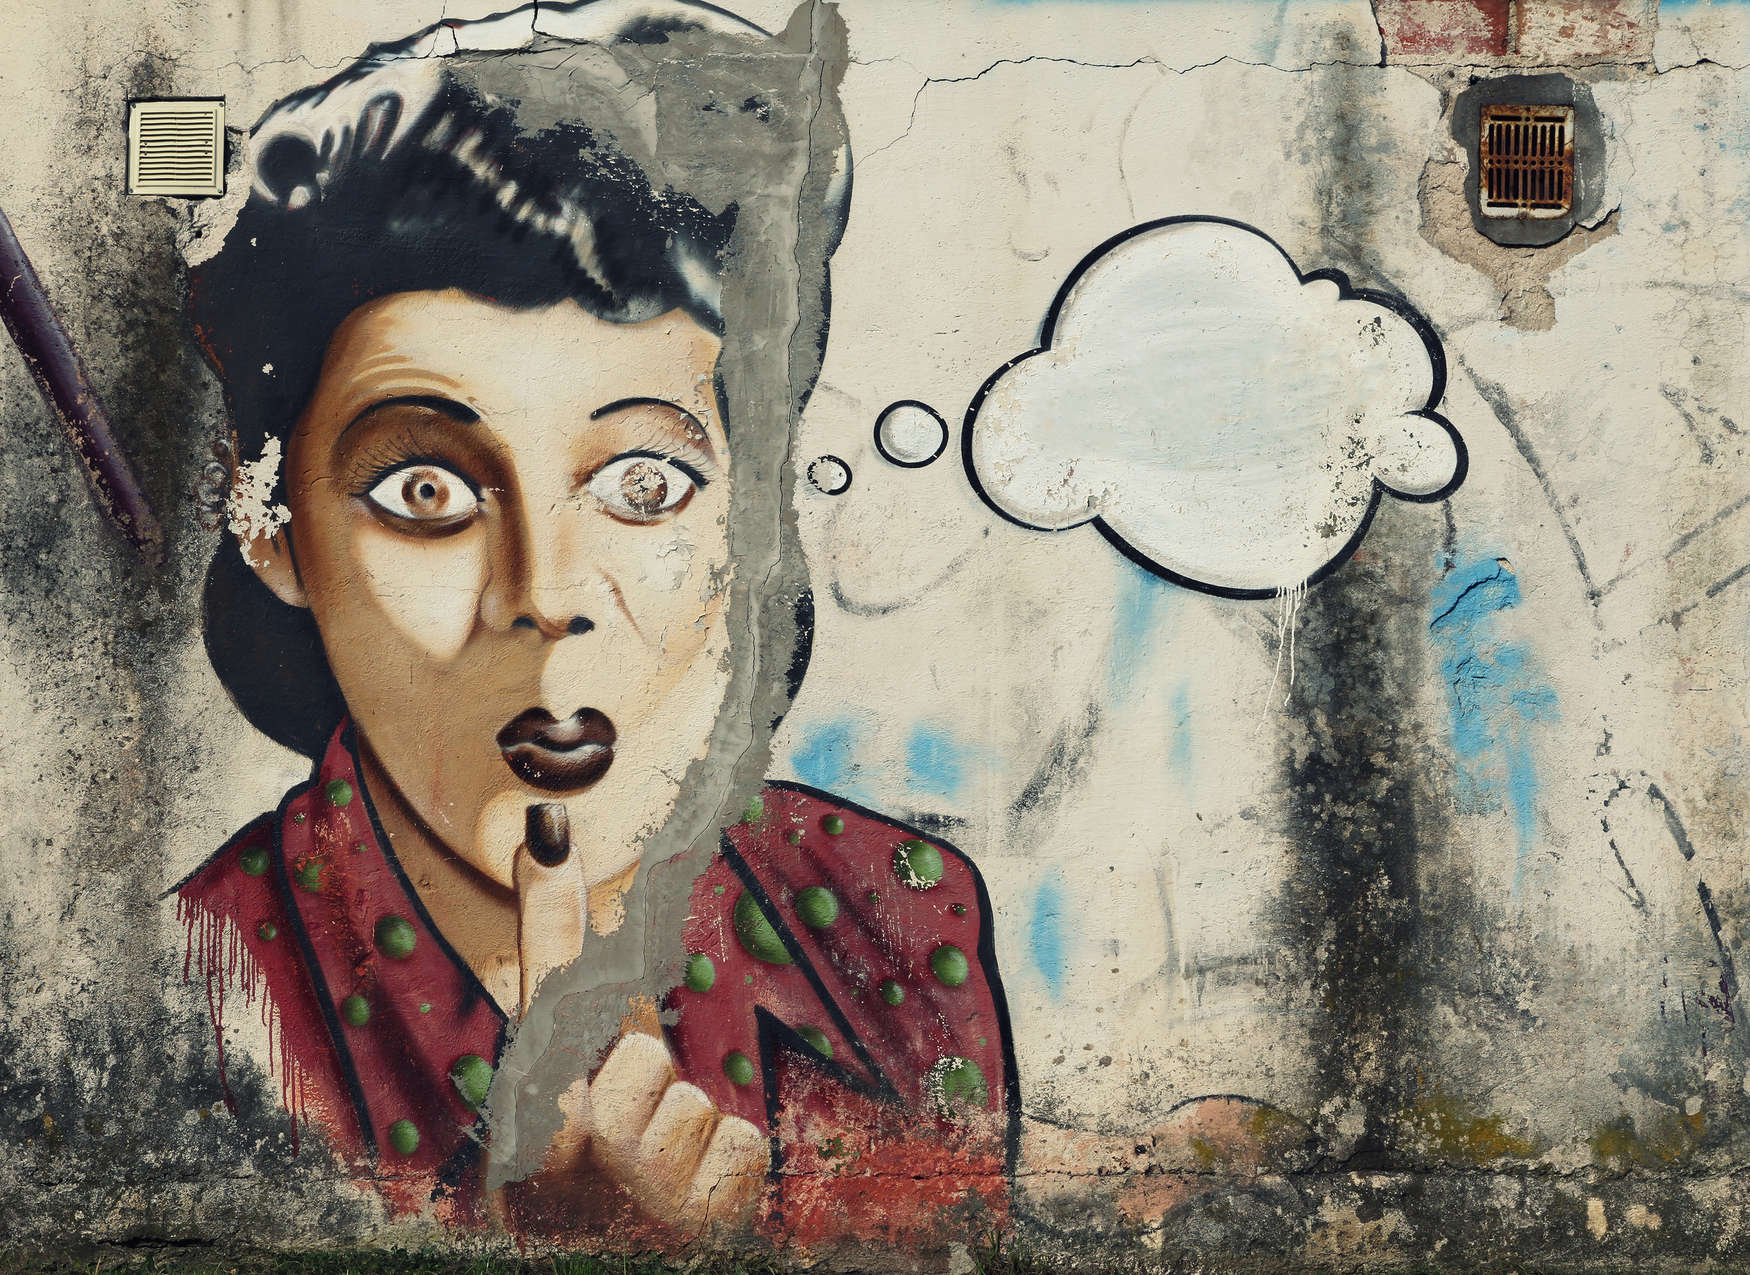             Photo wallpaper Woman with thought bubble as graffiti on stone wall - Grey, Red, White
        